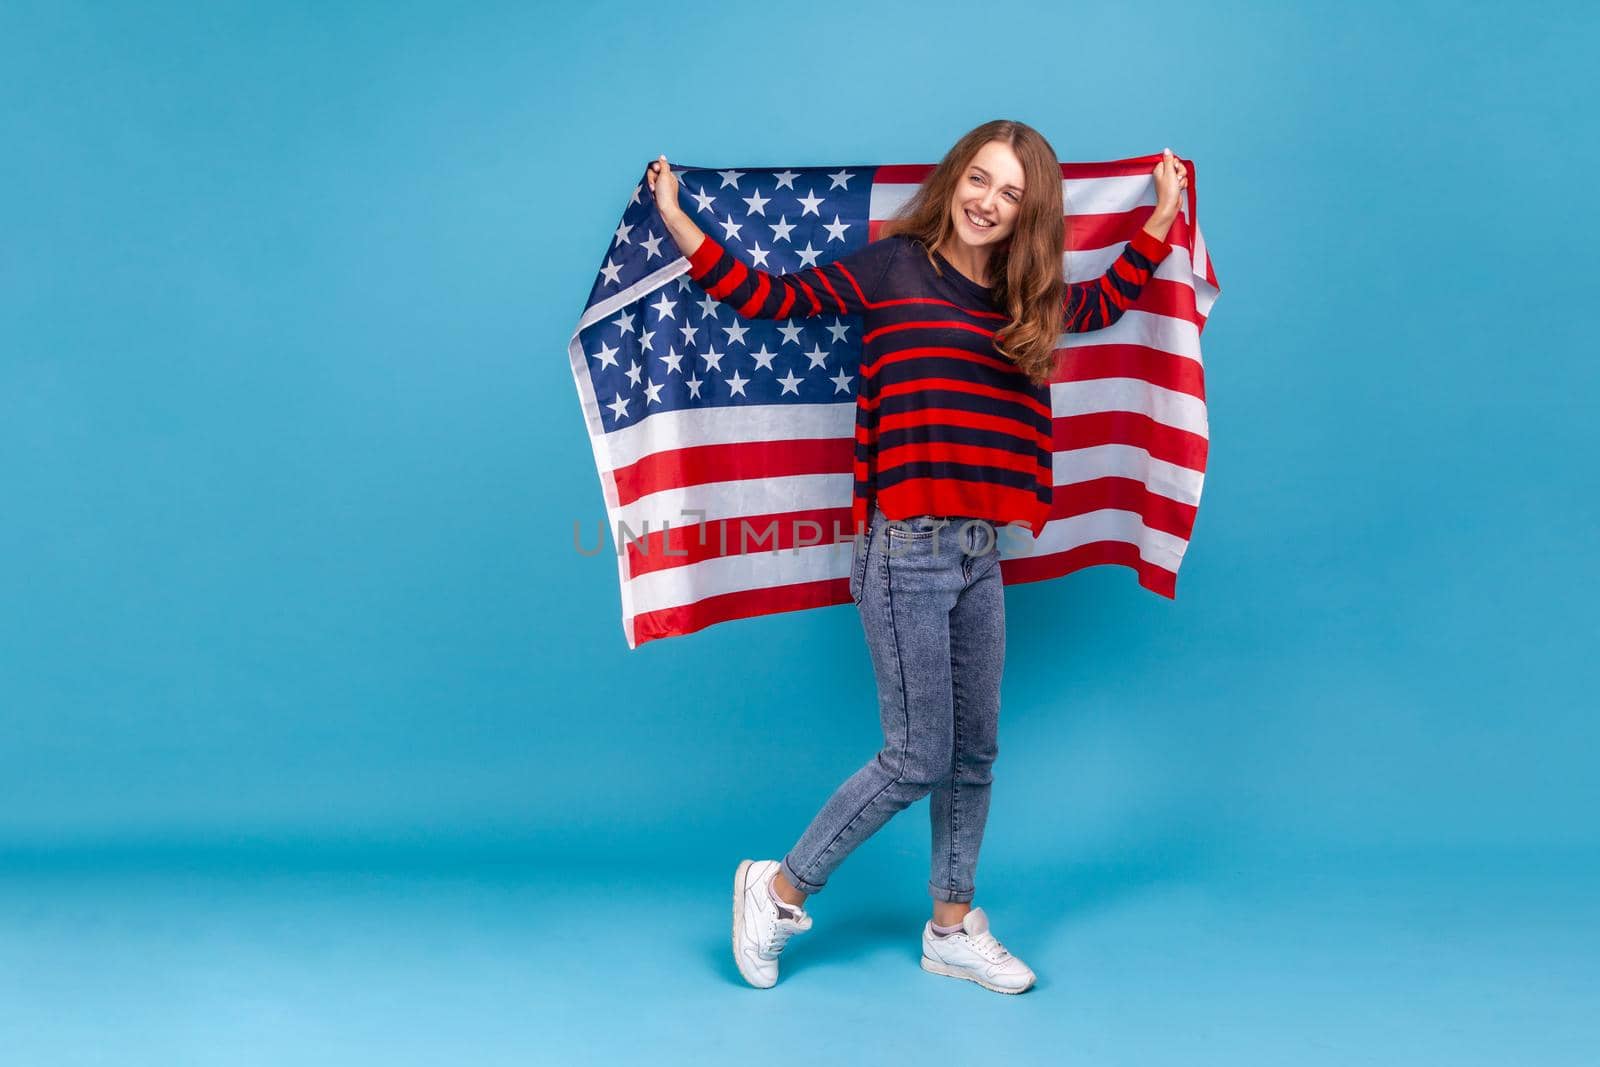 Woman holding USA flag and looking at camera with smile., celebrating national holidays. by Khosro1